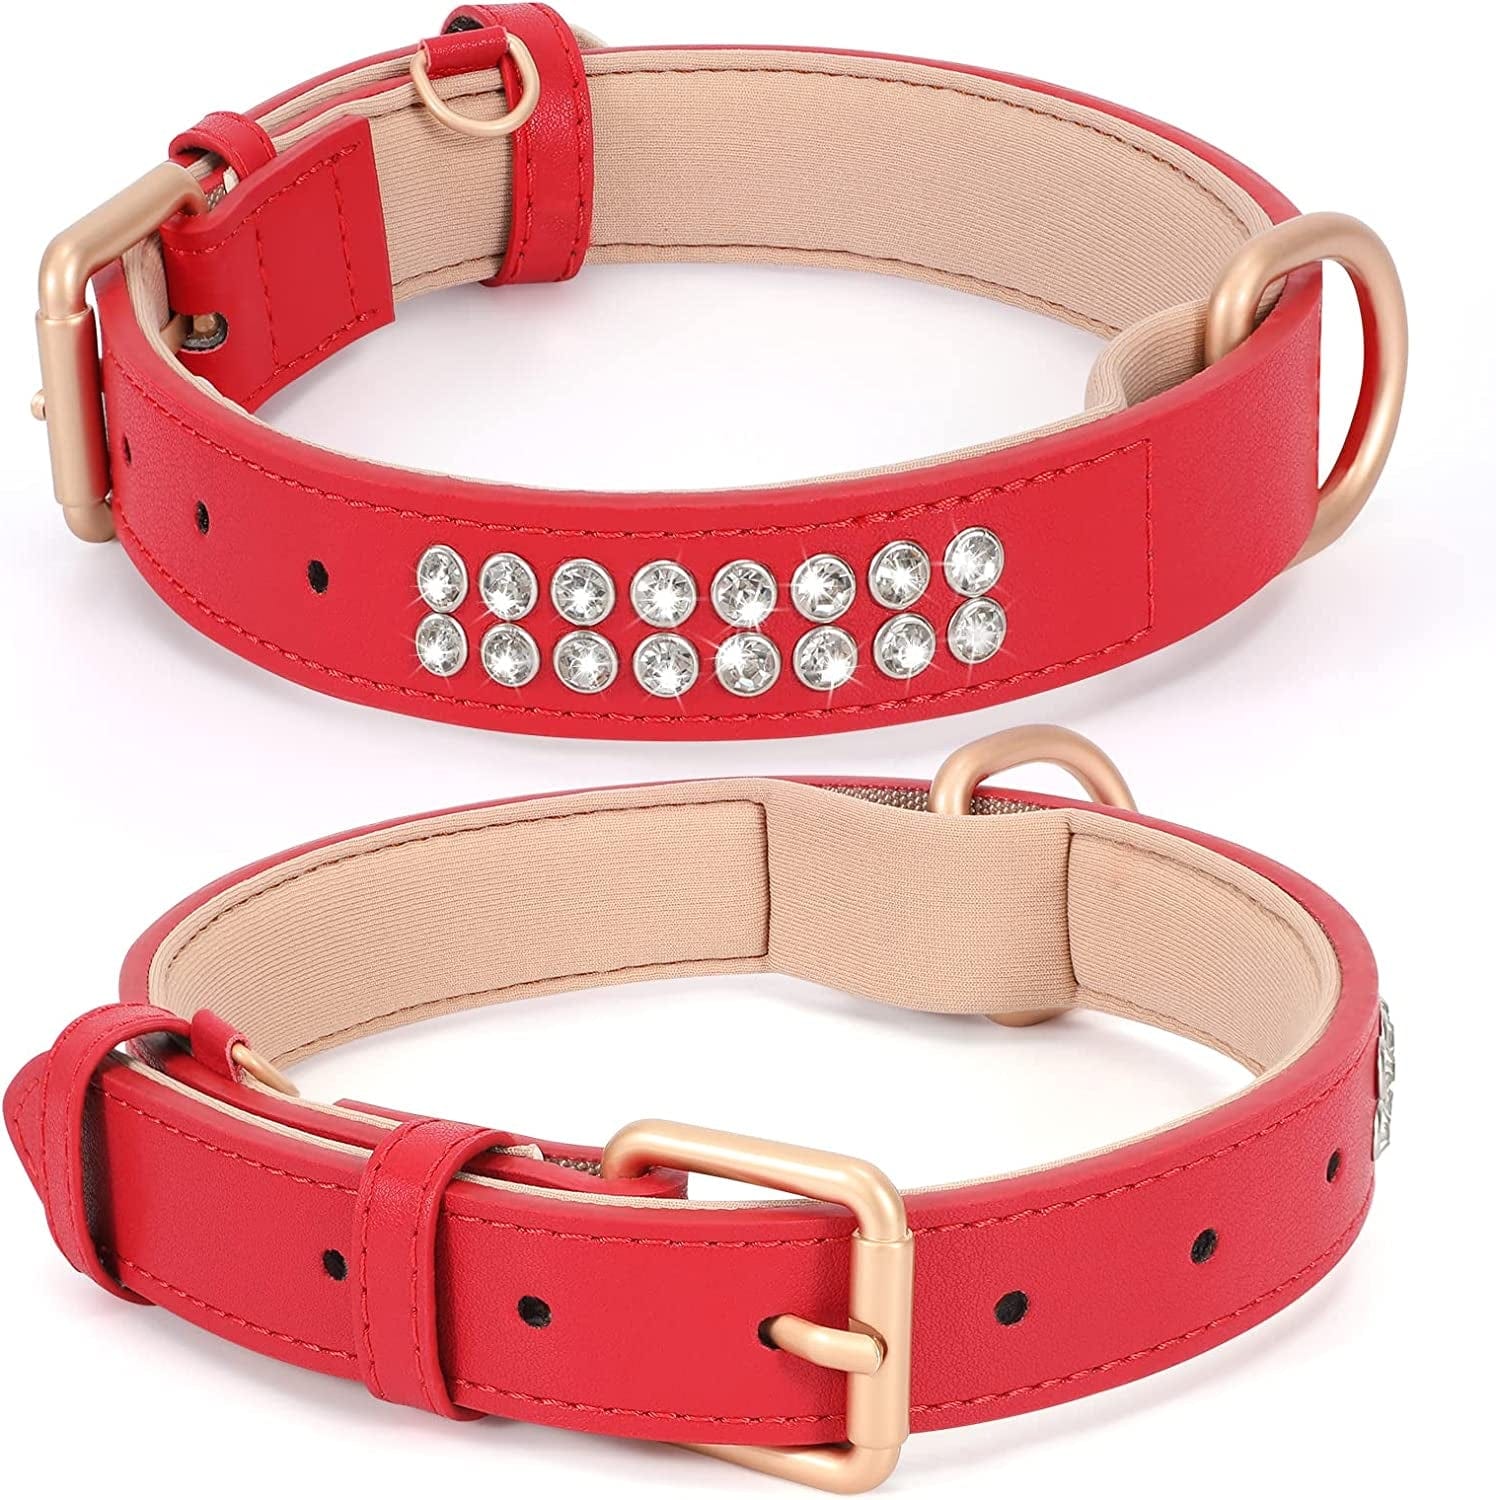 WHIPPY Airtag Leather Dog Collar GPS Tracker Air Tag Puppy Collar Adjustable Soft Leather Padded Dog Collar with Airtag Holder Case for Small Medium Large Dog Pet Backpack,Pink,M Electronics > GPS Accessories > GPS Cases WHIPPY G-red collar diamond XS:Neck 9"-13",Width 0.6" 